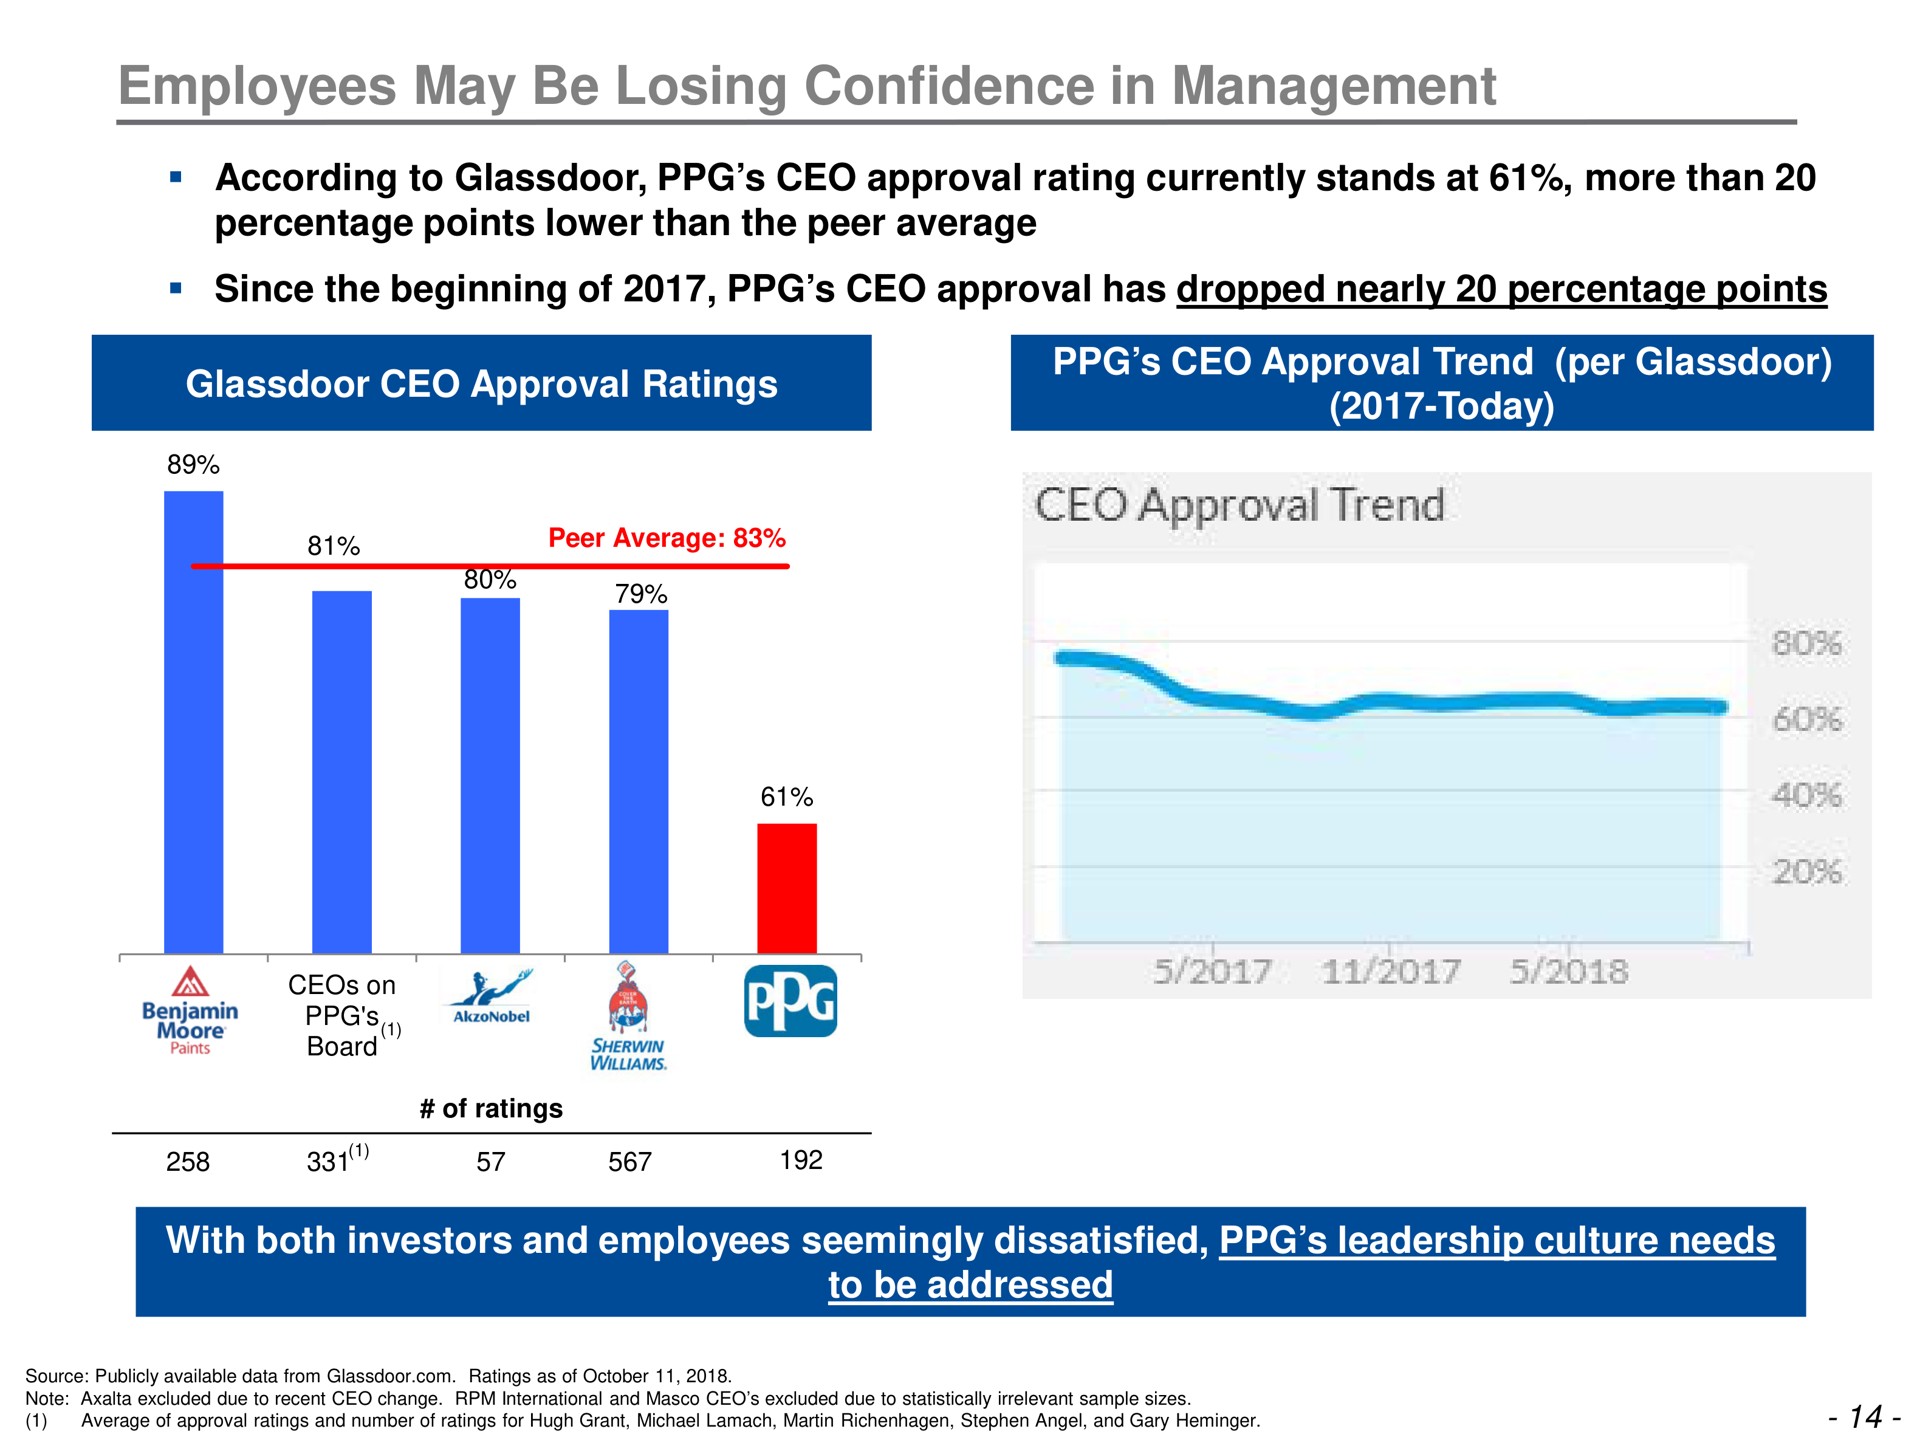 employees may be losing confidence in management approval trend | Trian Partners